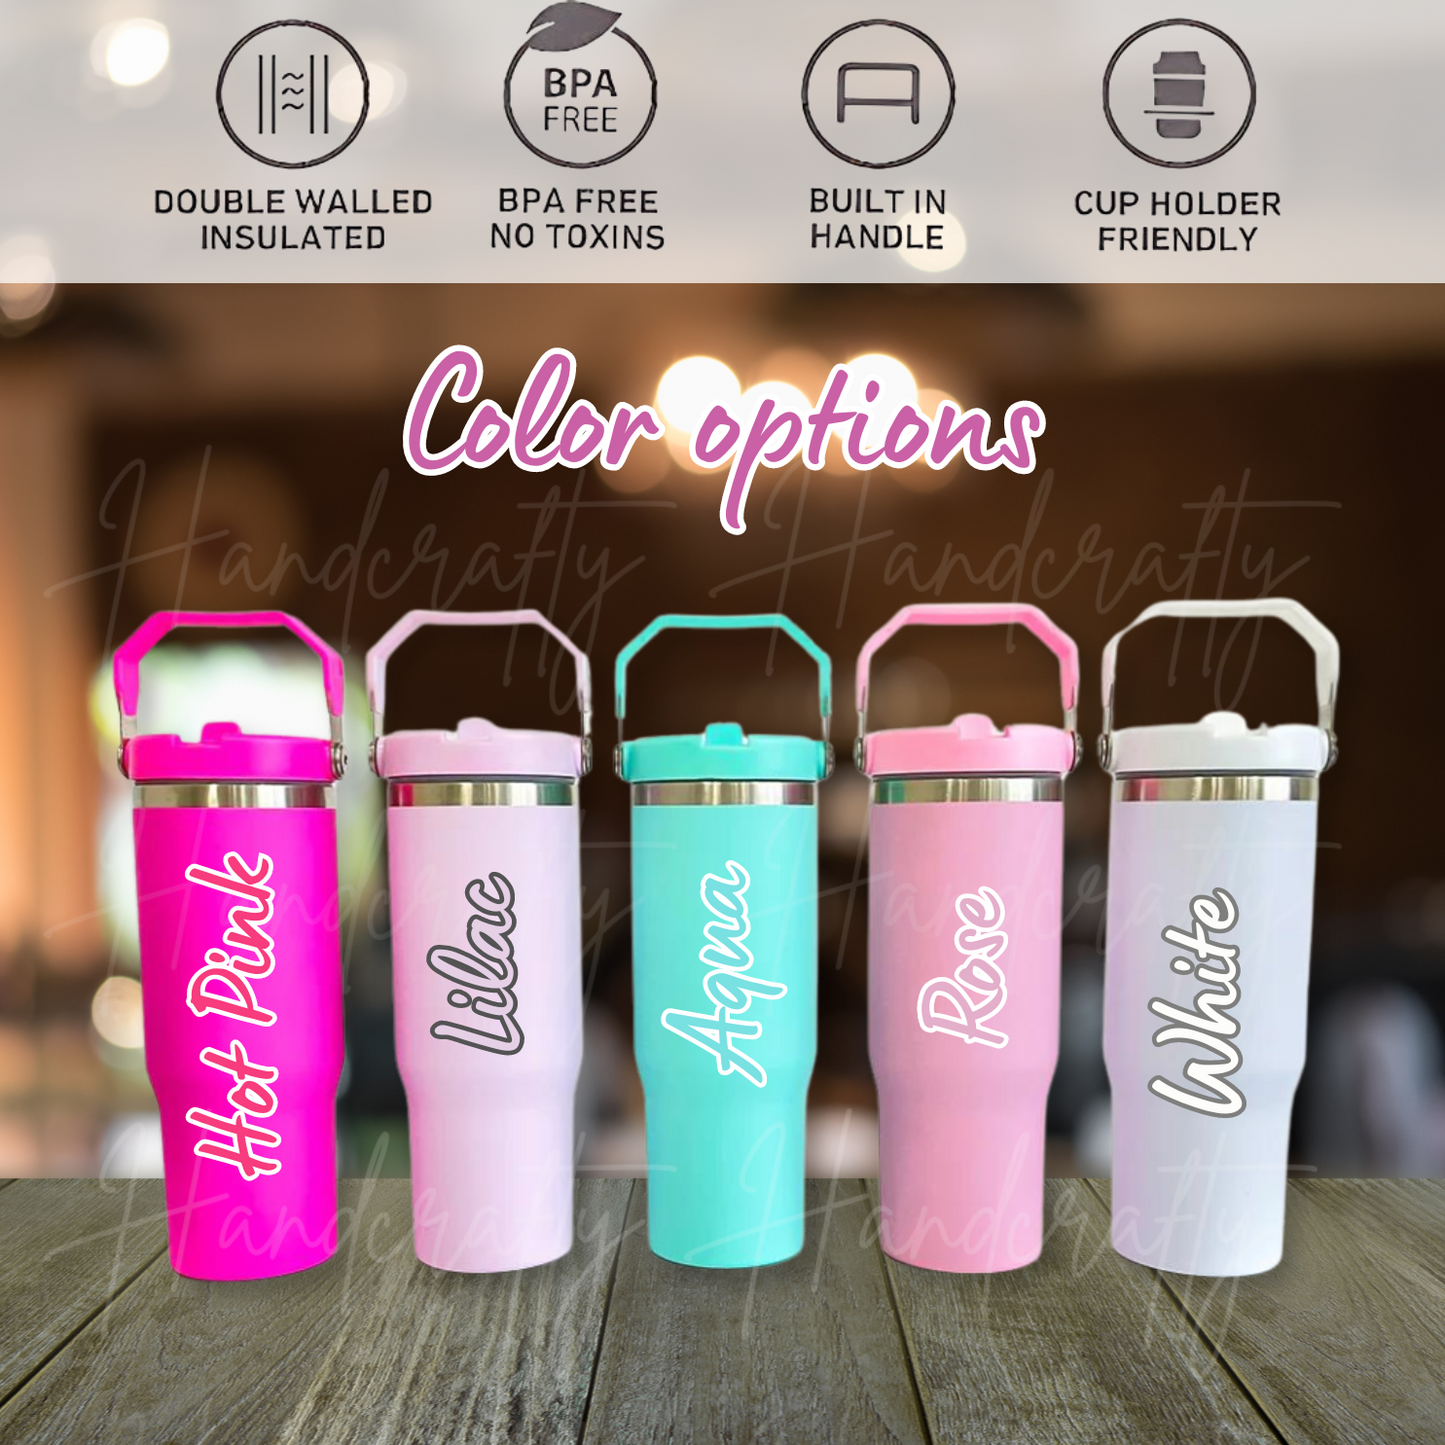 Personalized laser engraved flip straw insulated stainless steel tumbler for mom, Custom engraved flip straw tumbler for mama, Insulated stainless steel tumbler for mothers, Personalized gift tumbler for mom with flip straw, Engraved stainless steel insulated tumbler for mother, Laser engraved custom tumbler for mama, Personalized insulated tumbler with flip straw for moms, Custom stainless steel tumbler for Mother's Day, Engraved flip straw tumbler for mom, Personalized mama tumbler with straw